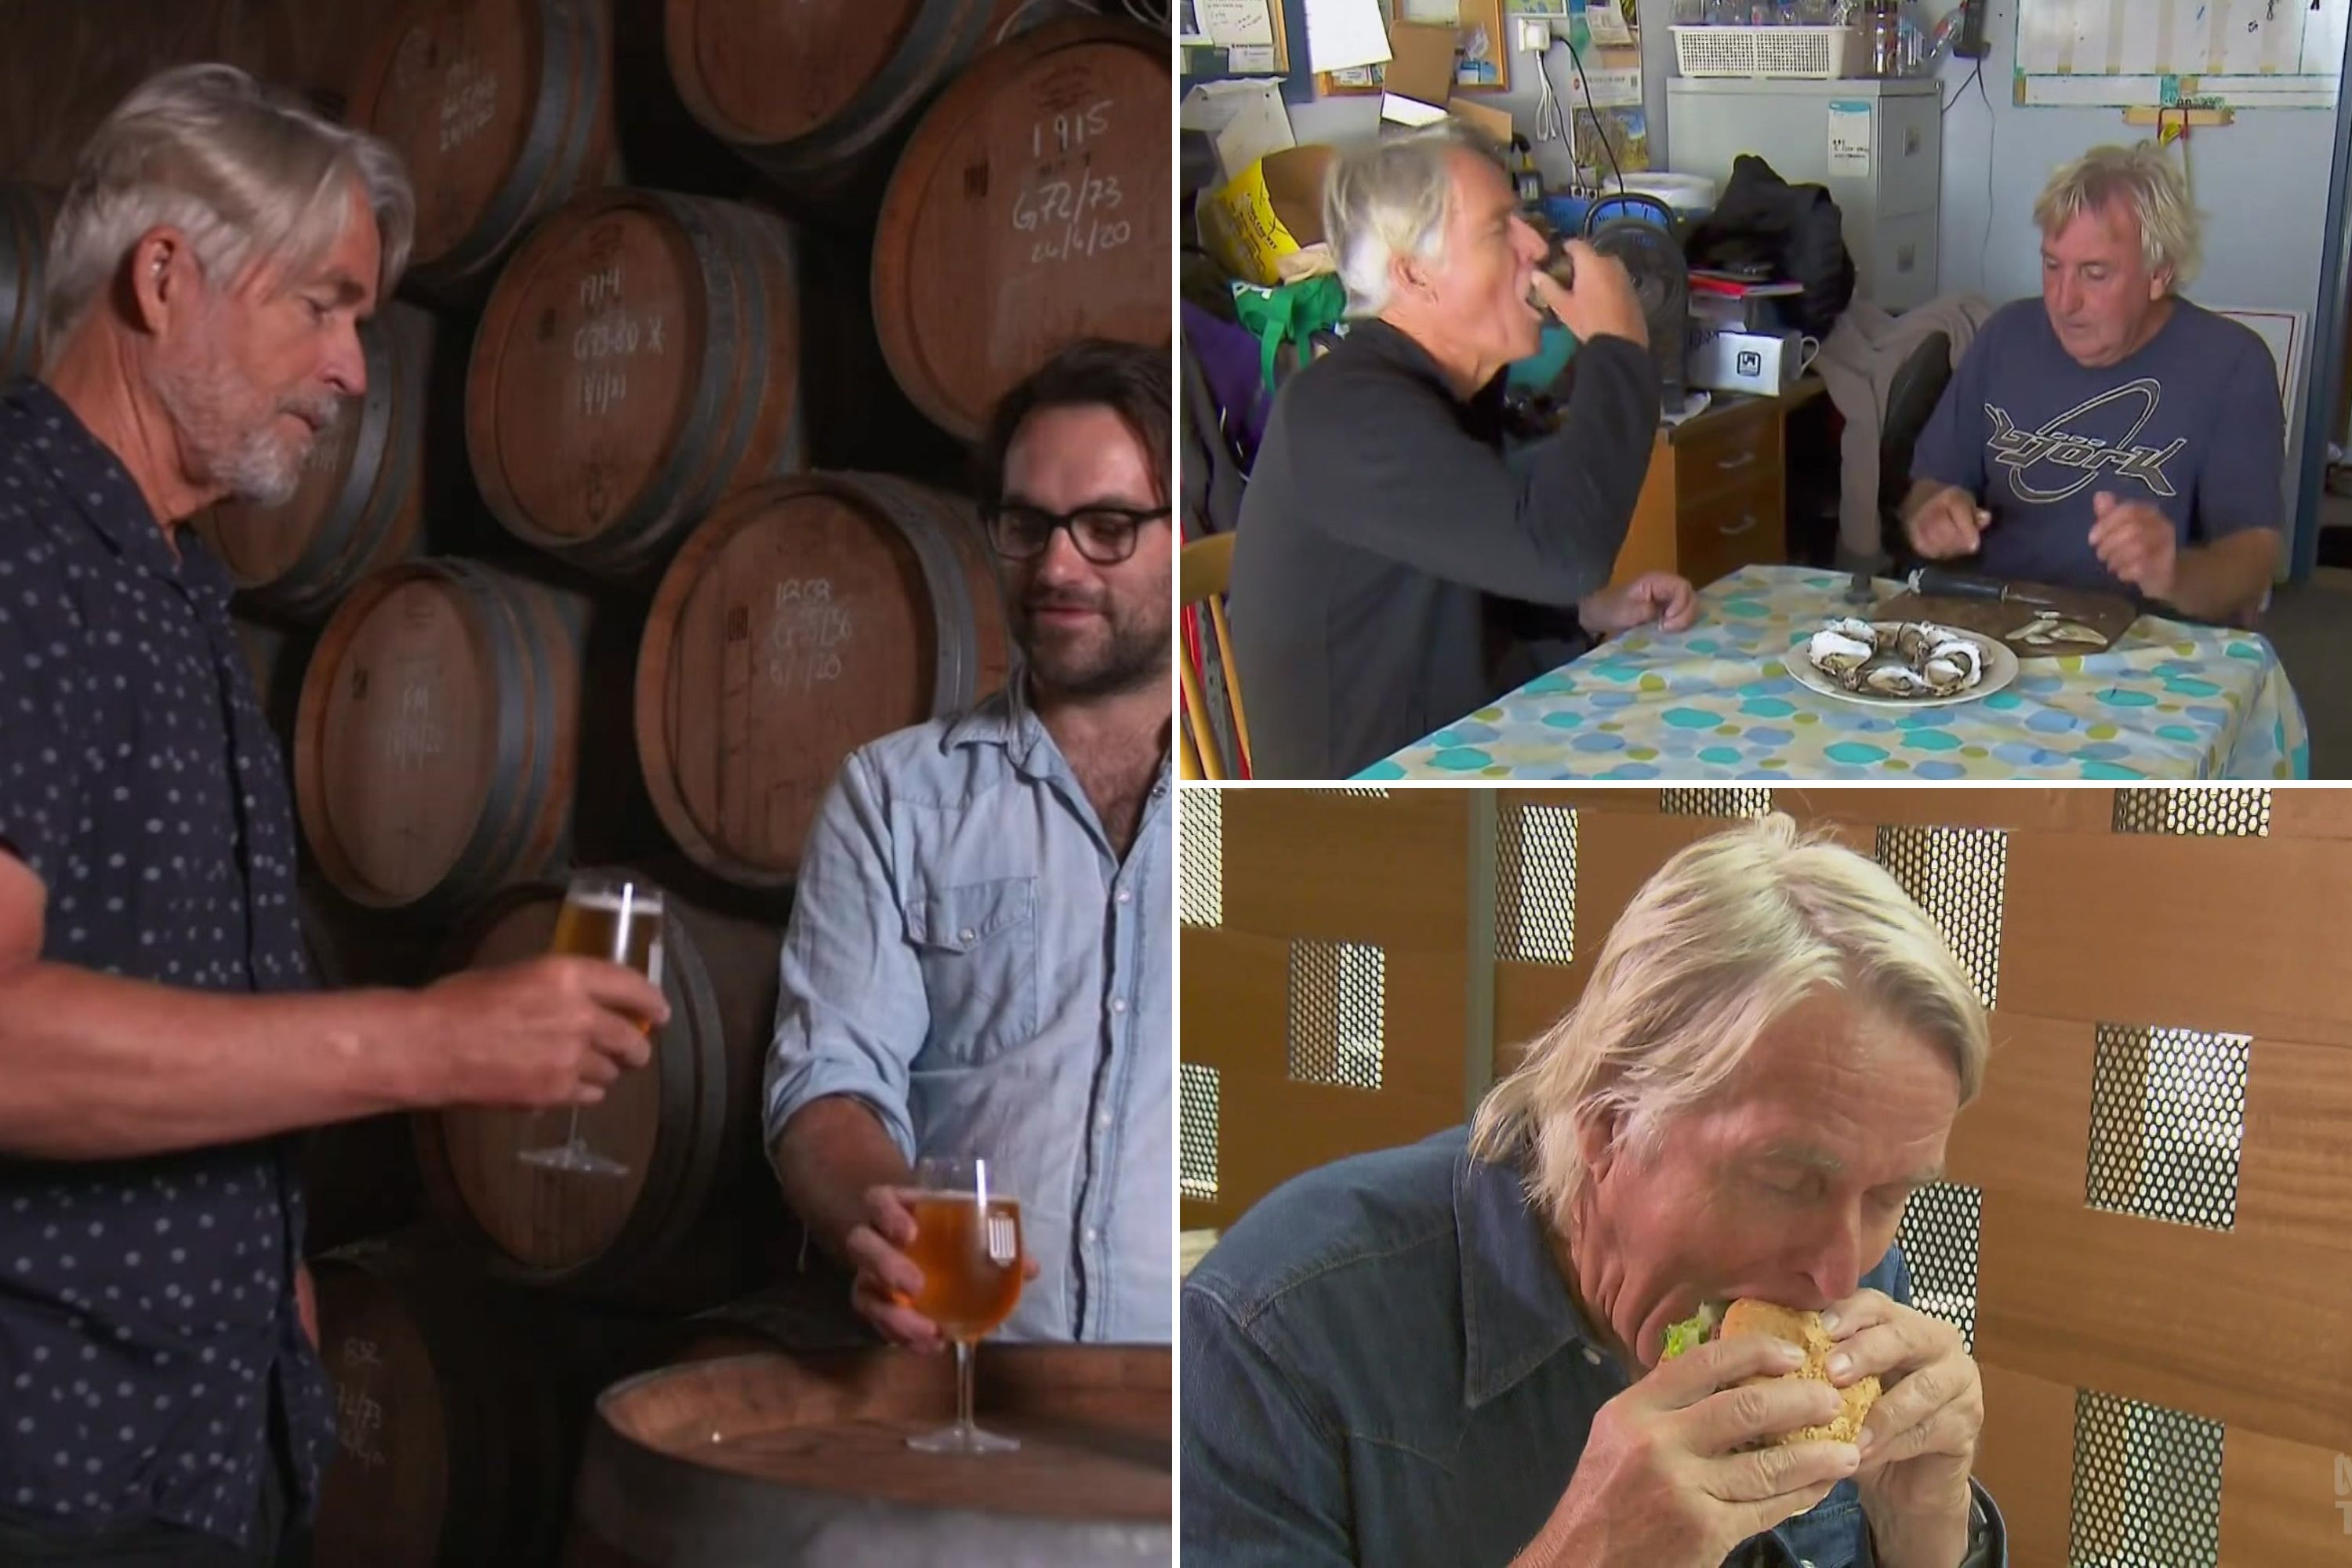 A collage of three photos showing men eating and drinking